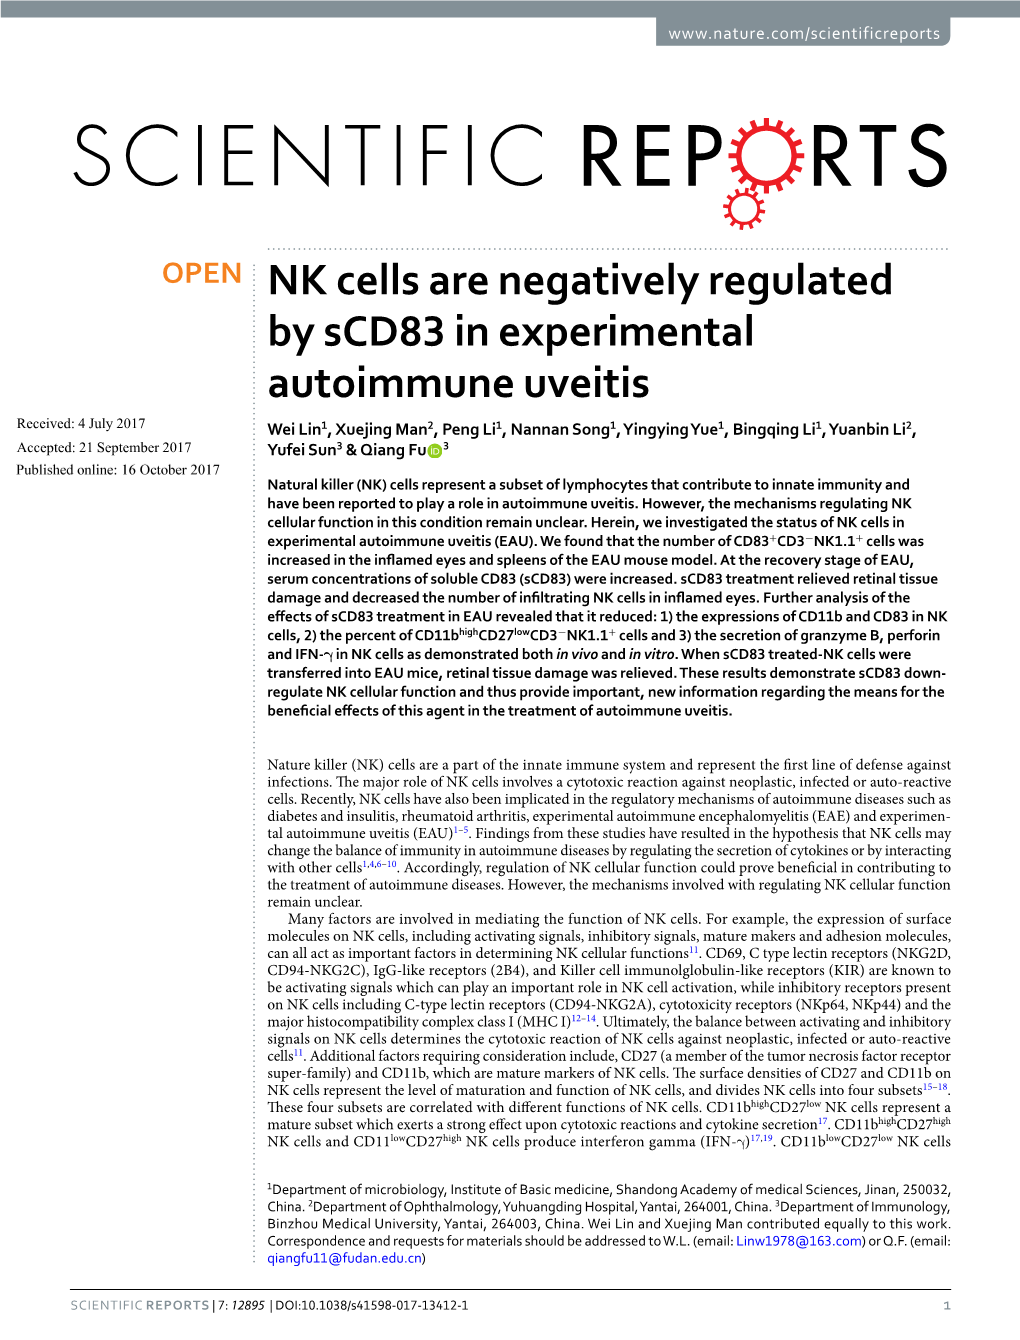 NK Cells Are Negatively Regulated by Scd83 in Experimental